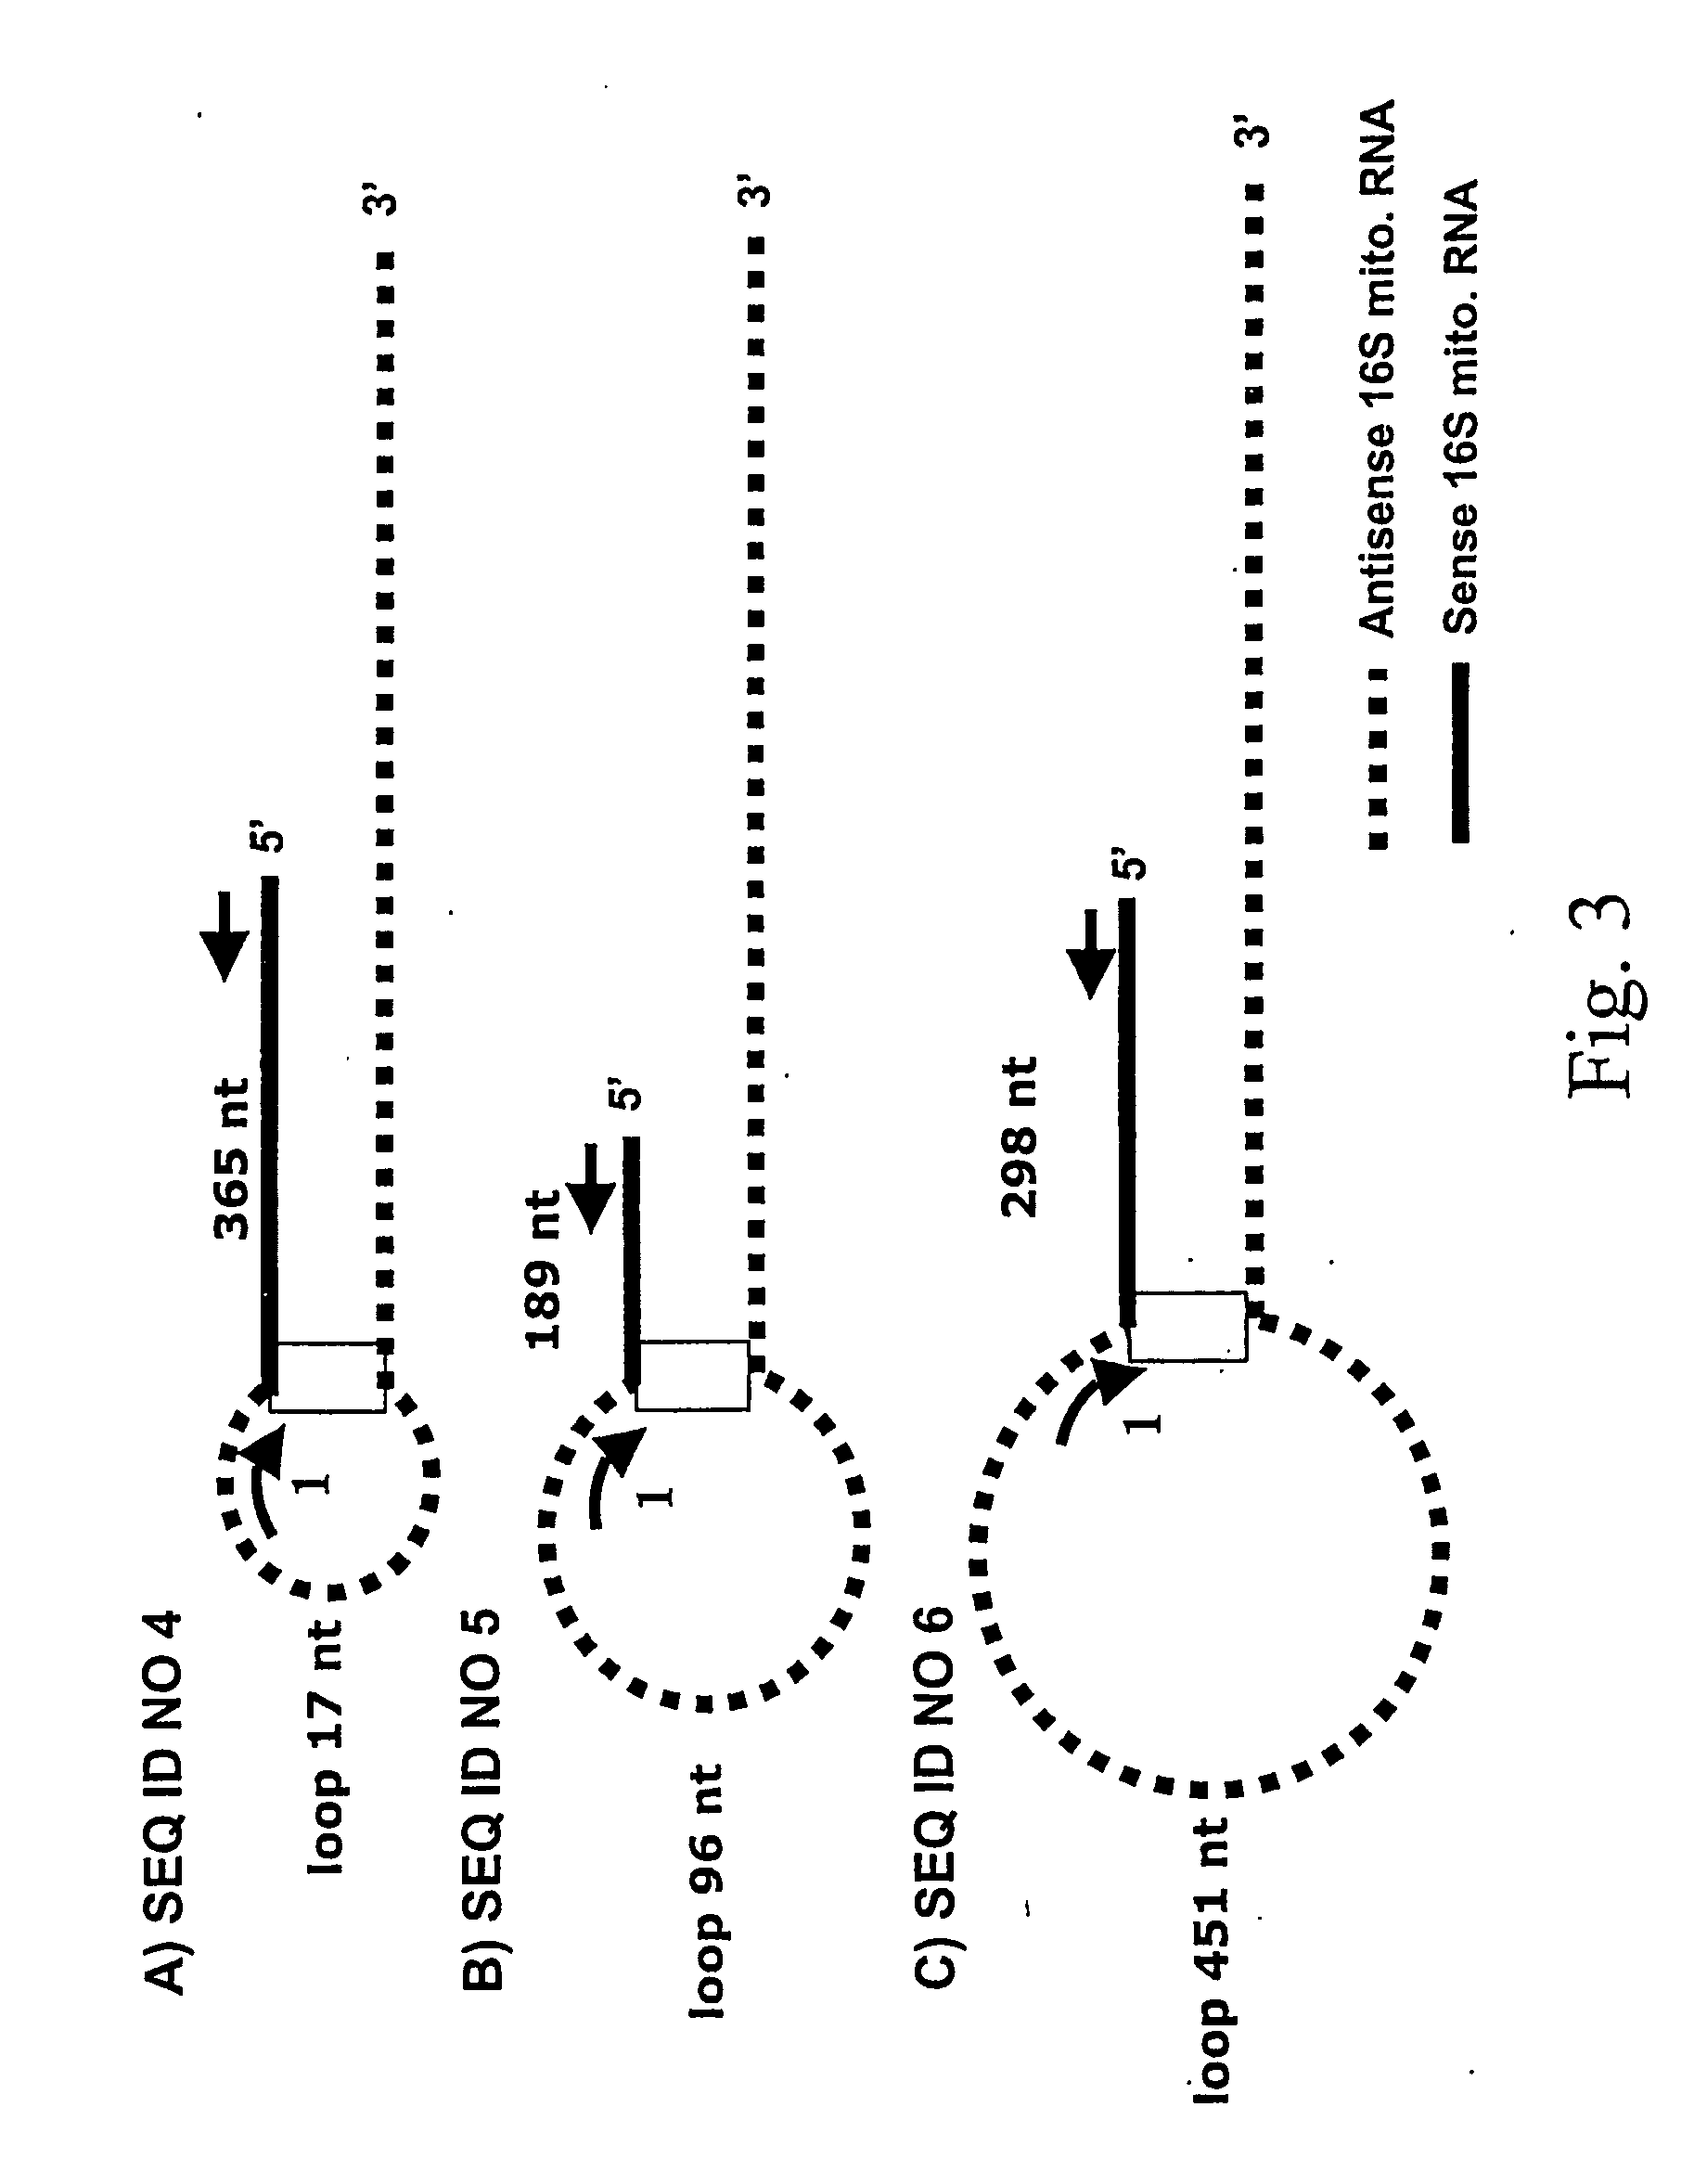 Markers for pre-cancer and cancer calls and the method to interfere with cell proliferation therein